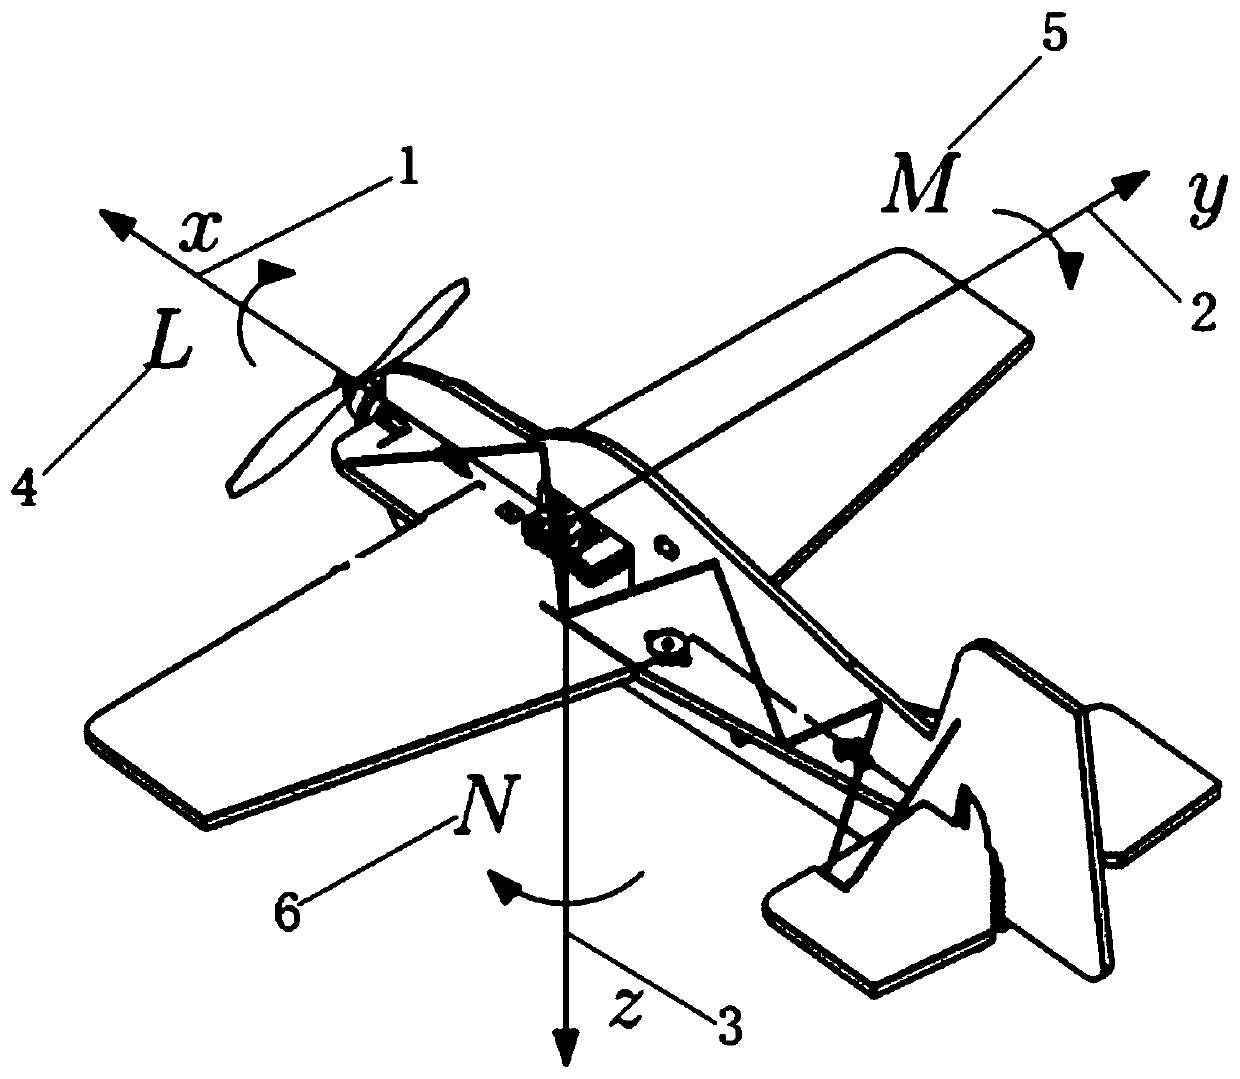 Unmanned aerial vehicle stunt flight control system and method